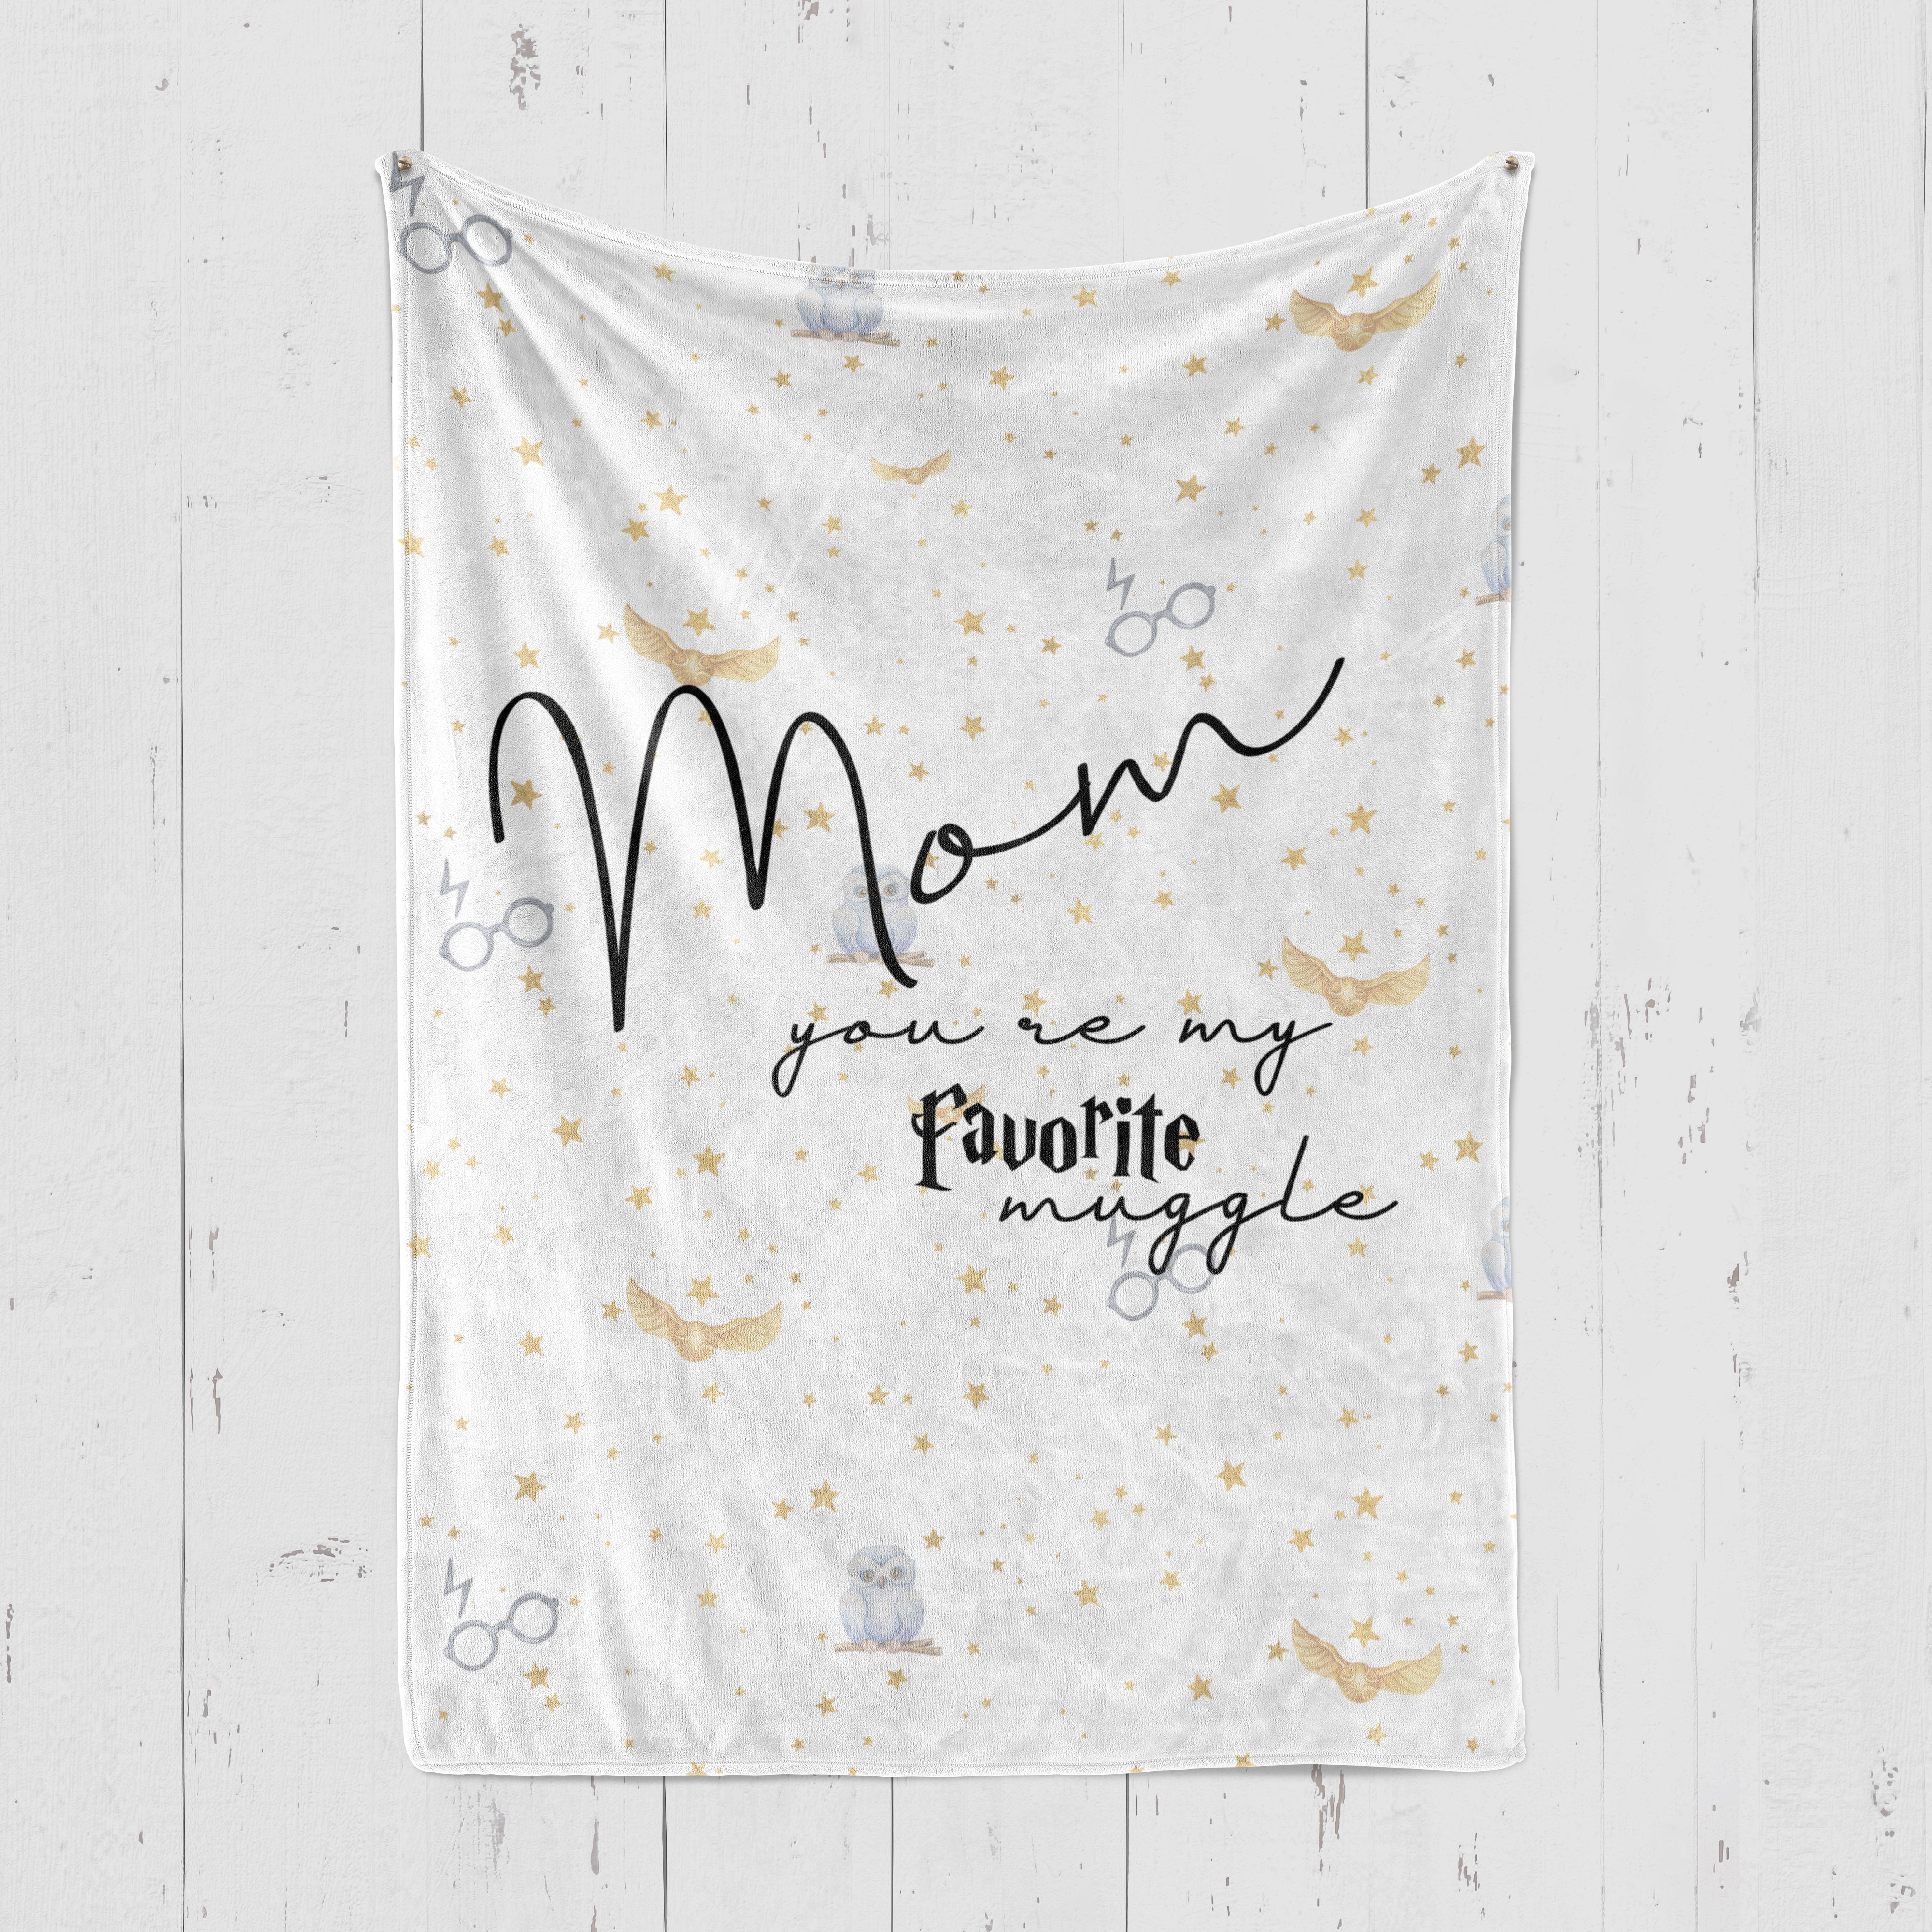 Personalized Blankets For Mom